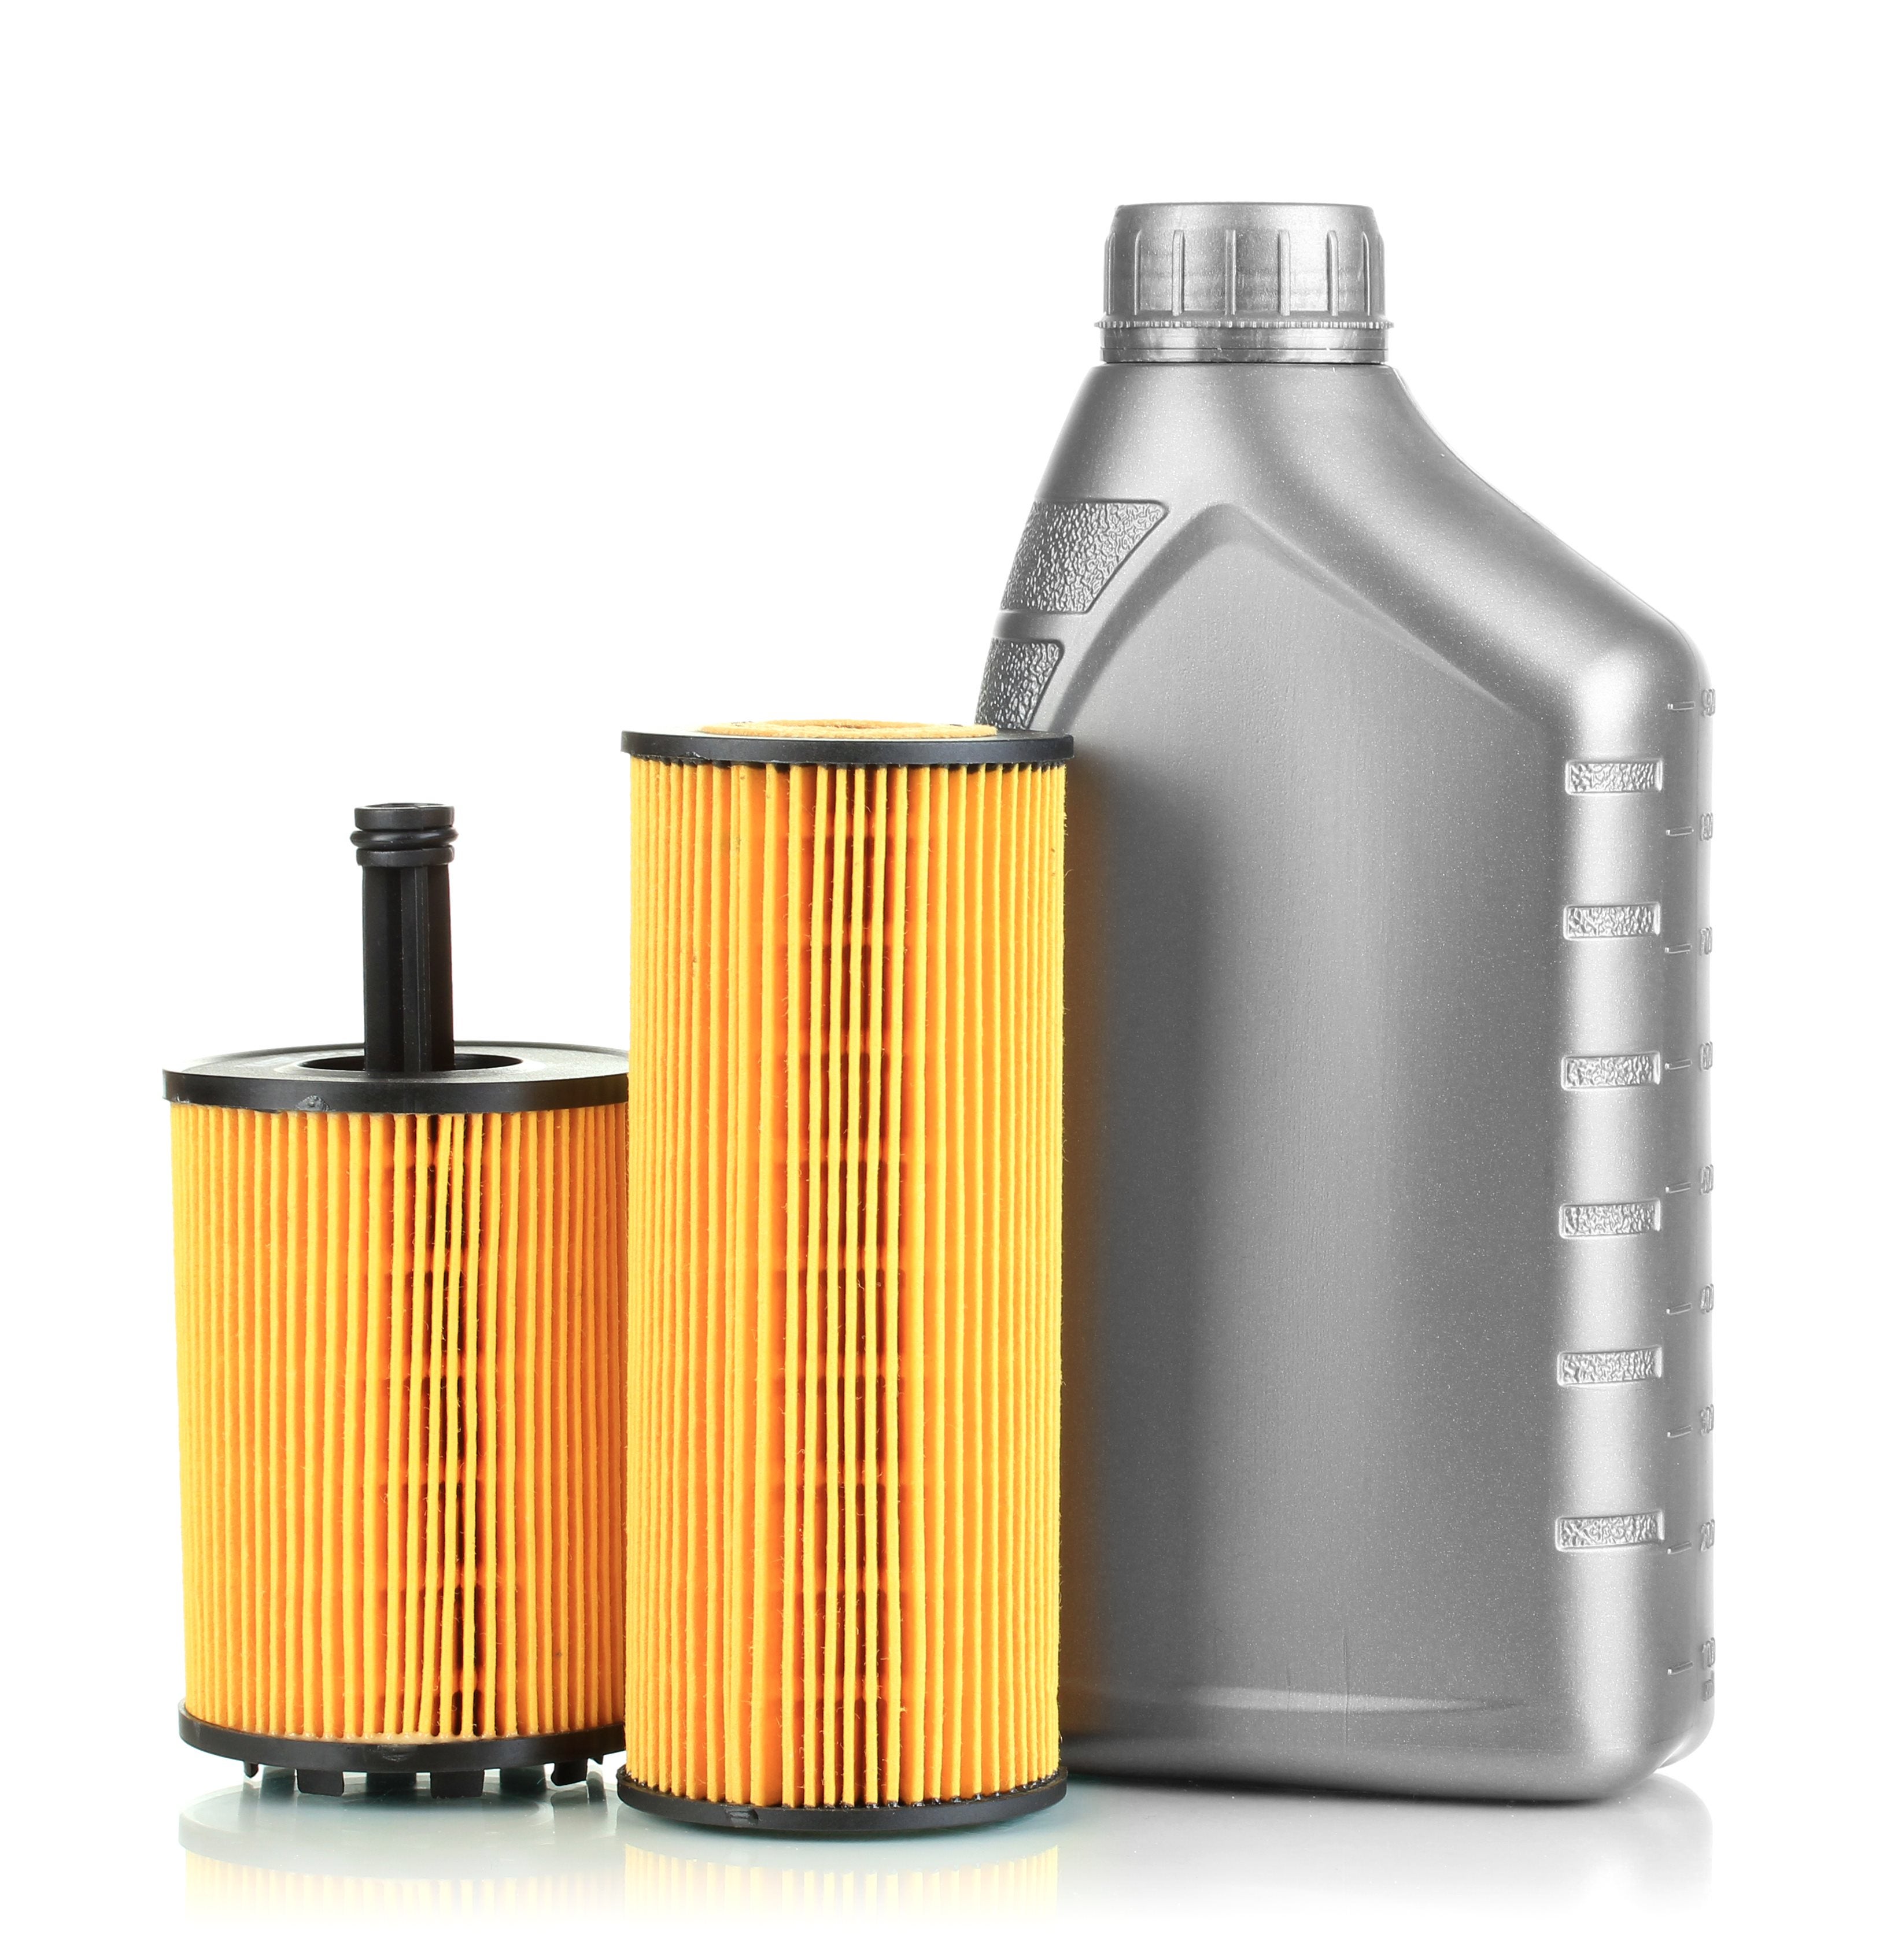 engine oil and filters without labels